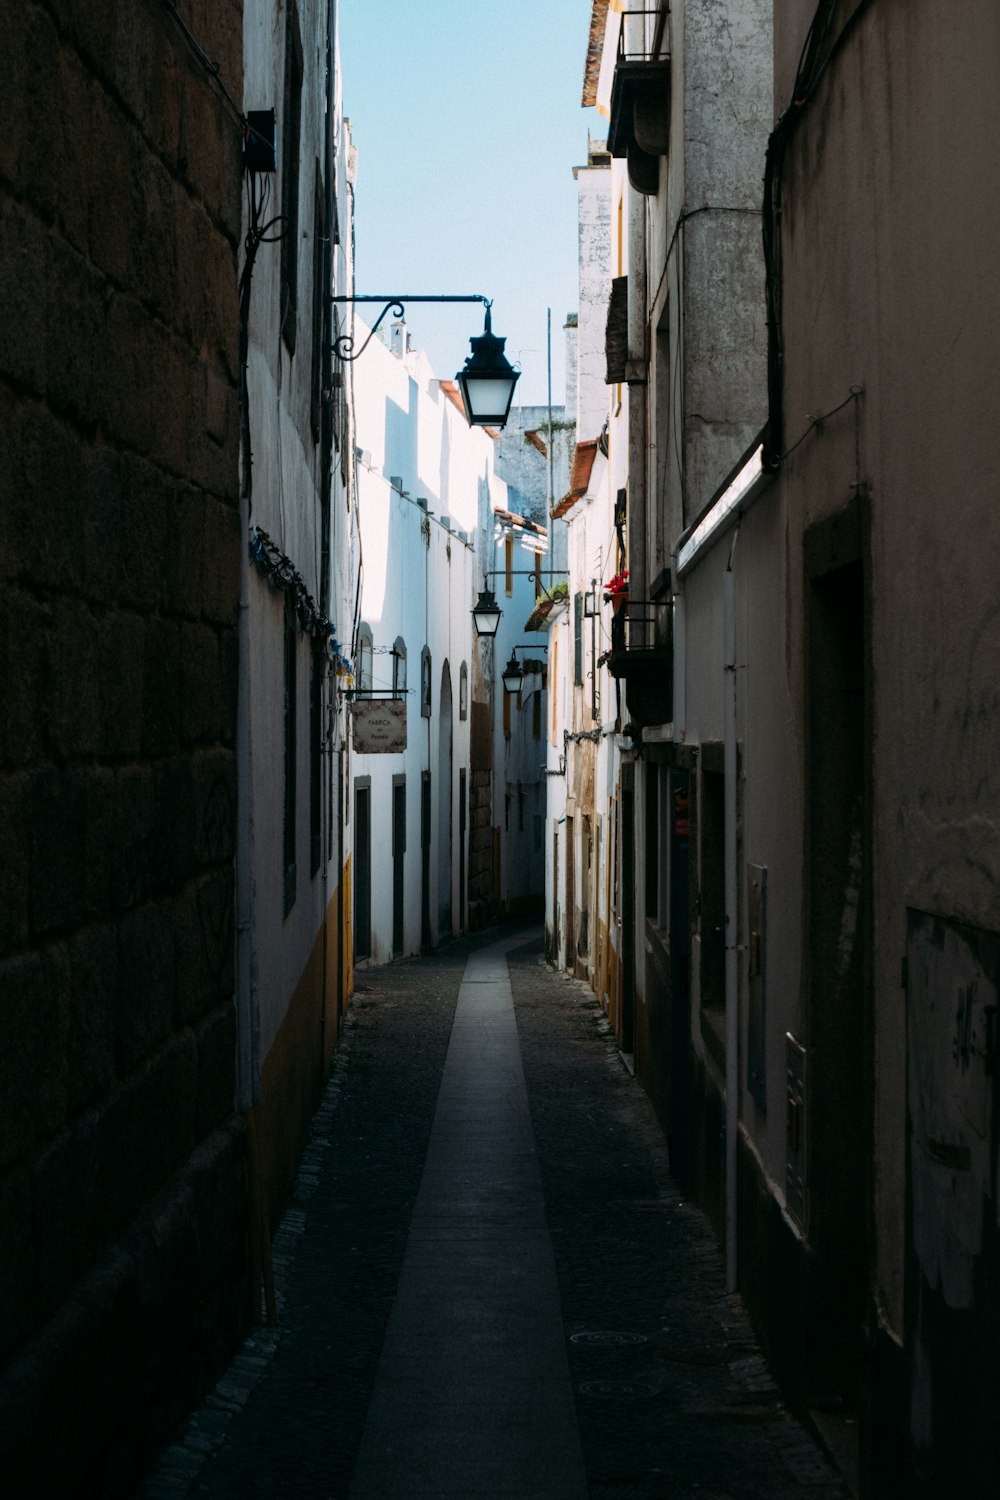 a narrow alley way with a street light in the distance